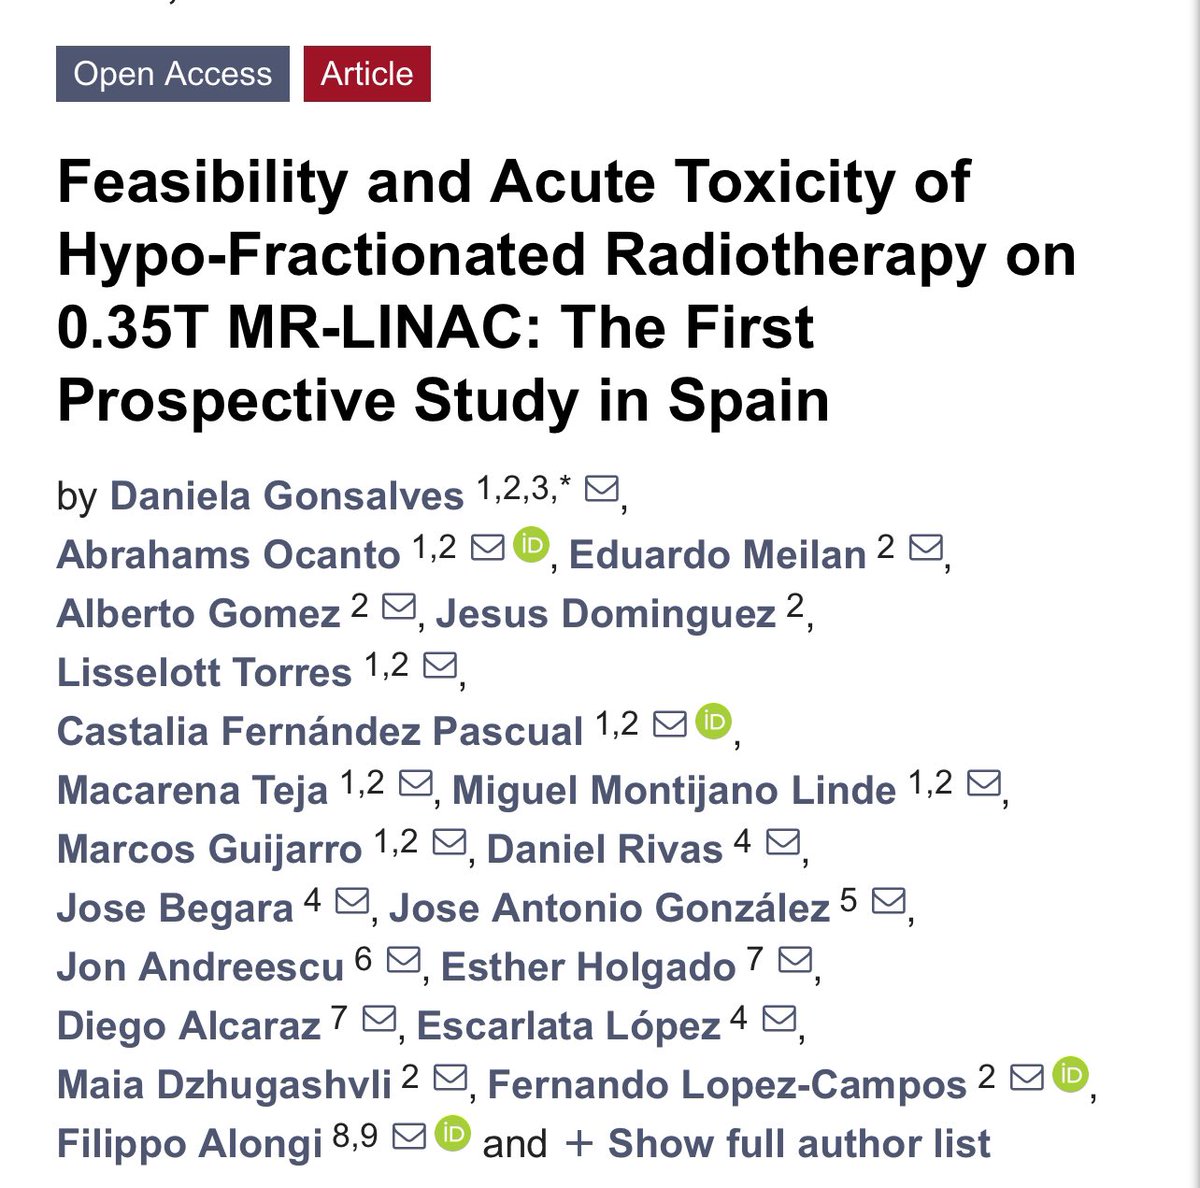 📄Feasibility and Acute Toxicity of Hypo-Fractionated Radiotherapy on 0.35T MR-LINAC: The First Prospective Study in Spain • Our paper is OUT. Congrats all authors ☺️ mdpi.com/2072-6694/16/9… @alongi_filippo @F_lopez_campos @FuenteApolo @dgpieretti @SEOR_ESP @ESTRO_RT